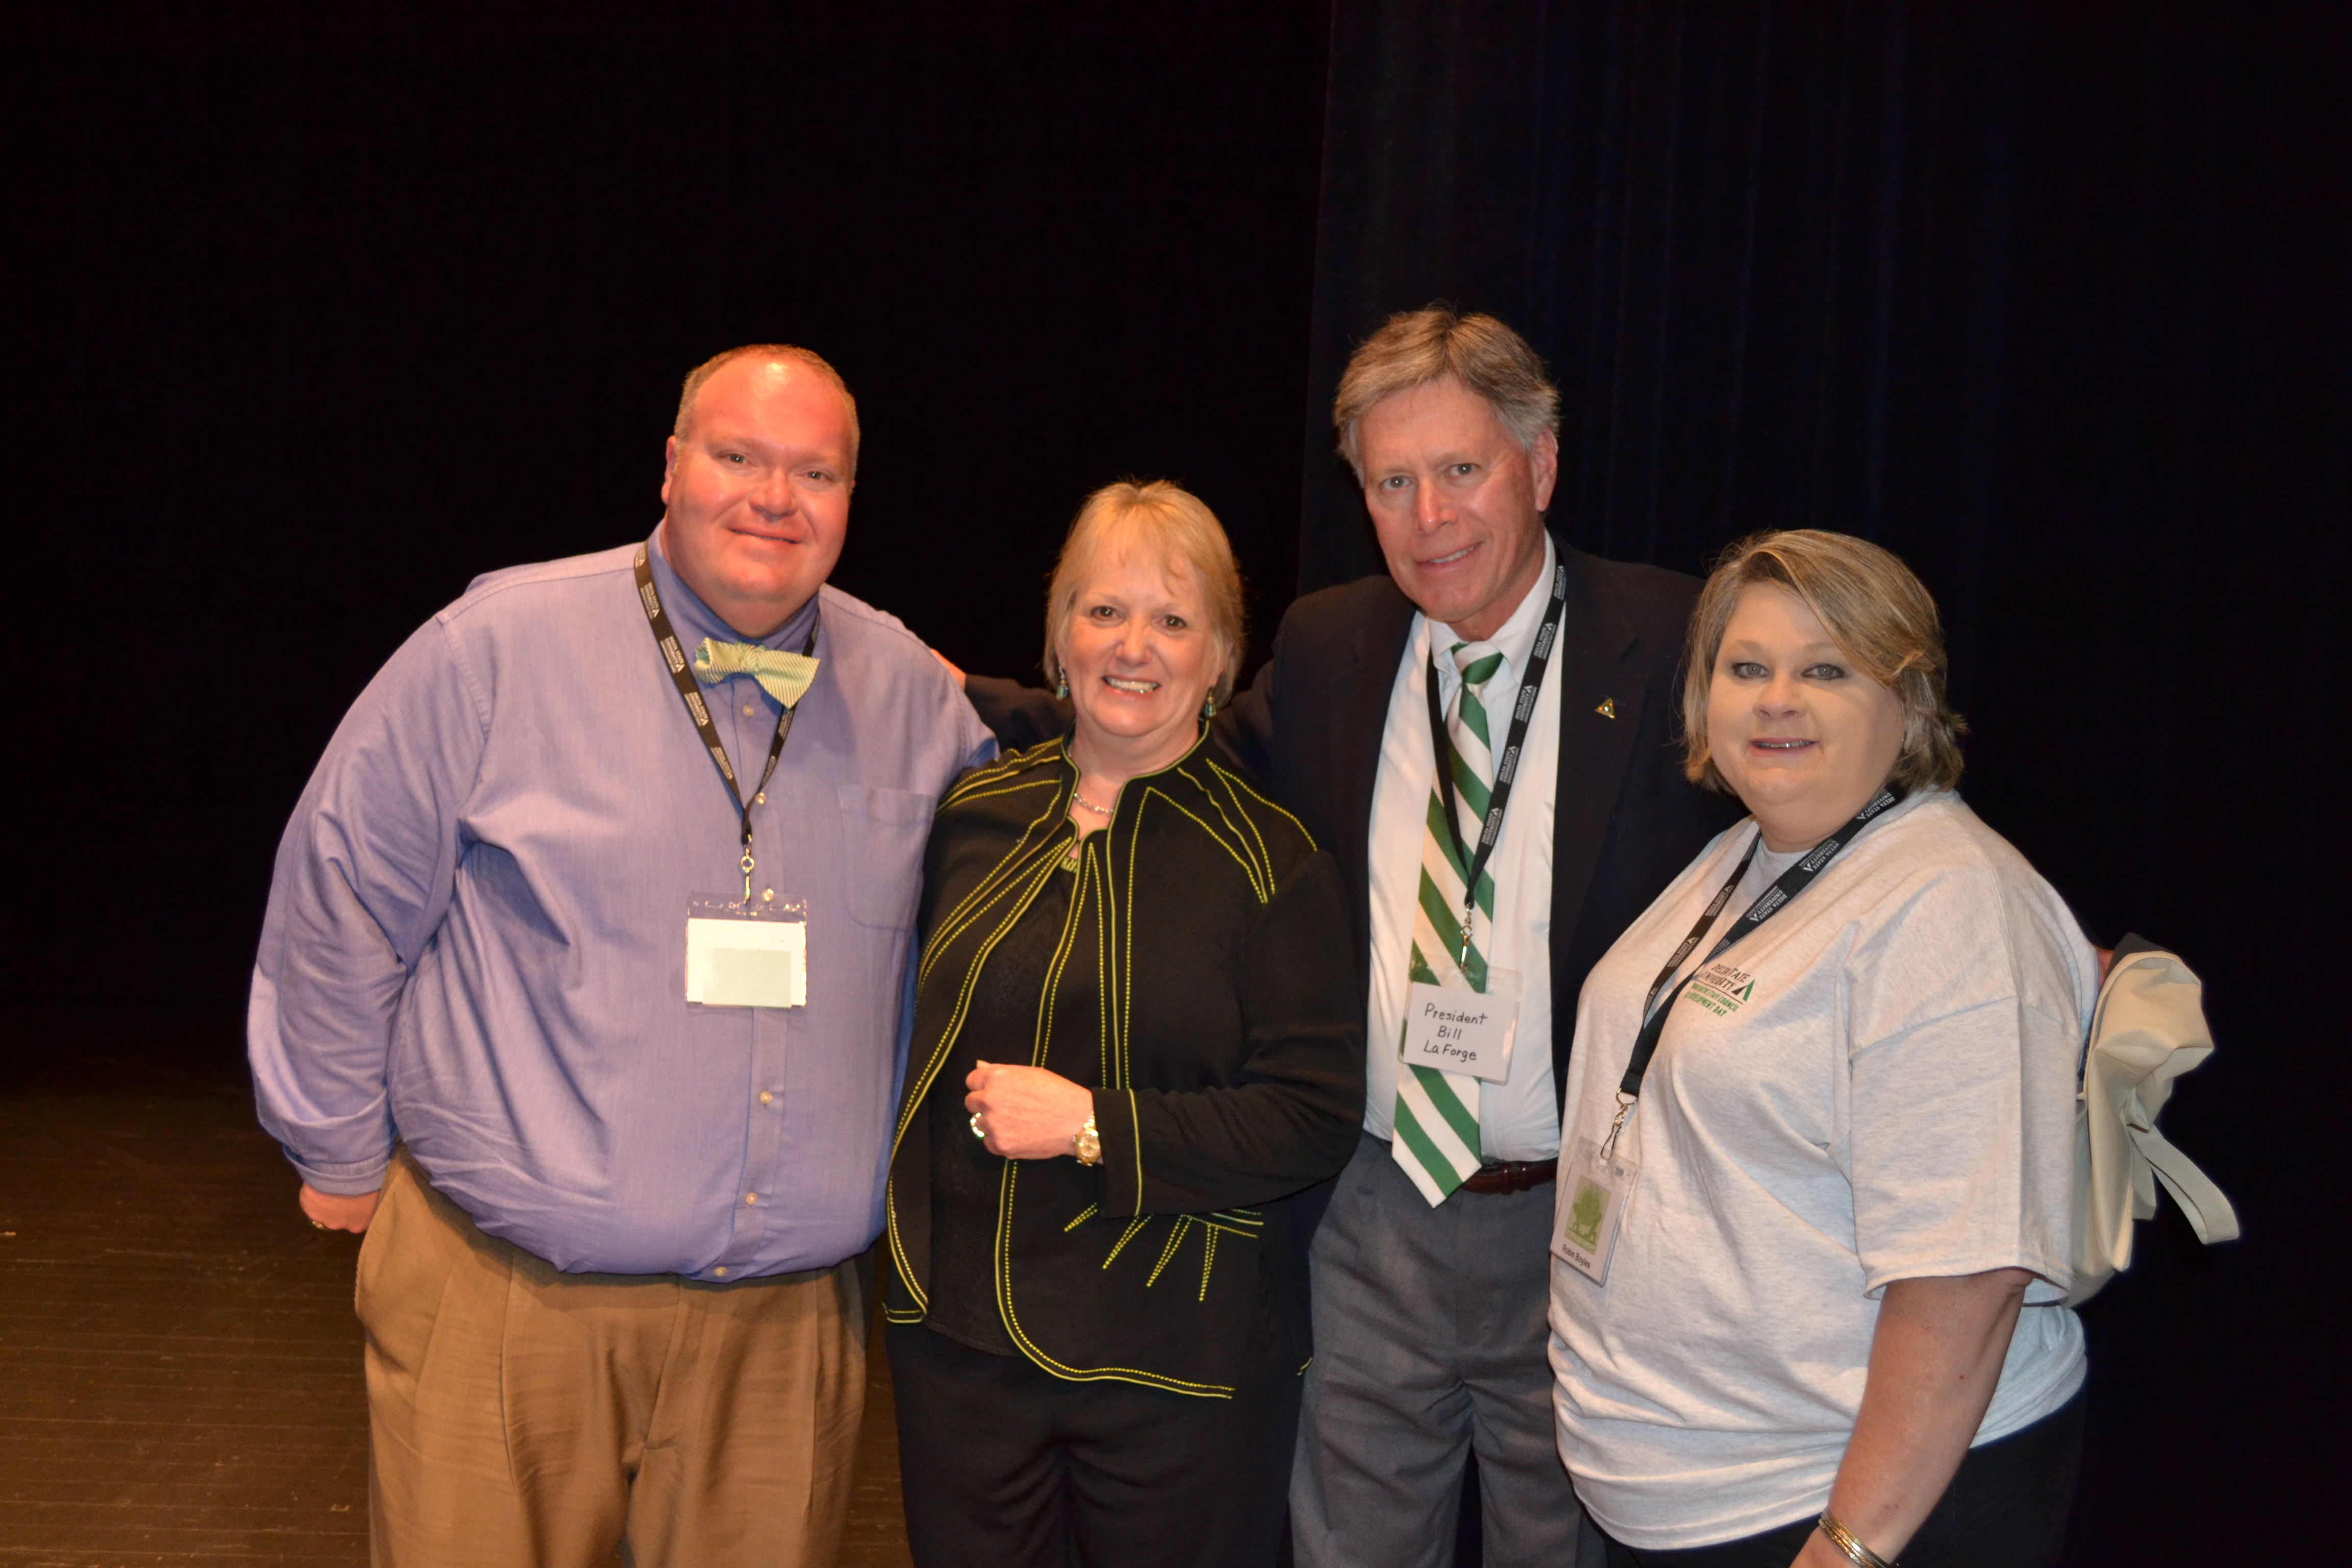 Photo: President of Delta State Staff Council Matt Jones, guest speaker Amy D. Whitten, J.D., President William N. Laforge and Chair Elect for Staff Council, Robin Boyles, gather for a photo at Staff Development Day.